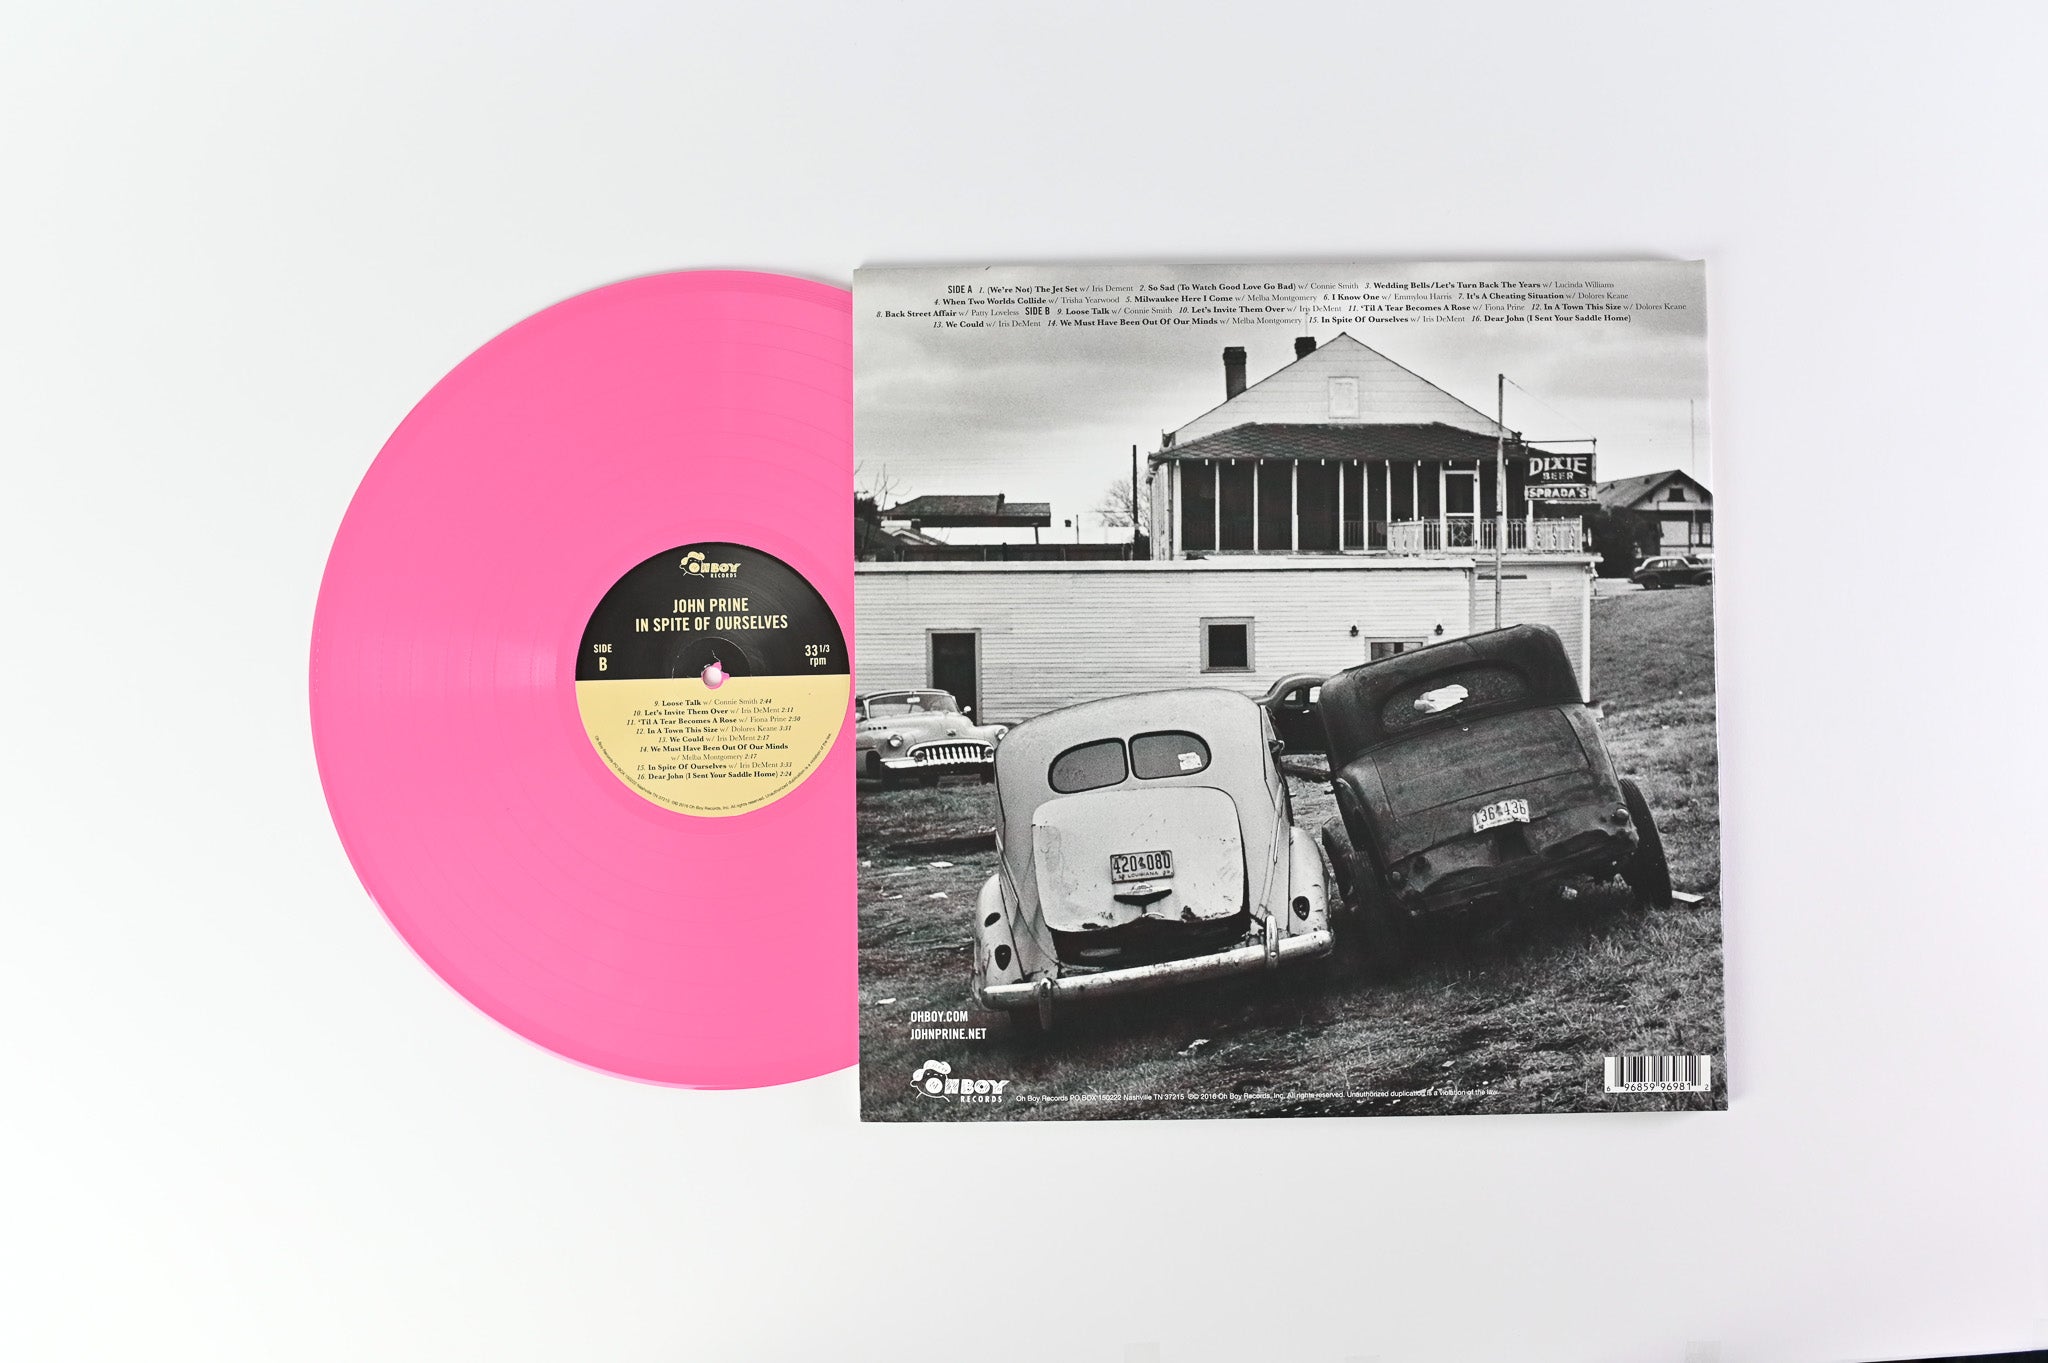 John Prine - In Spite Of Ourselves on Oh Boy Records Pink Vinyl